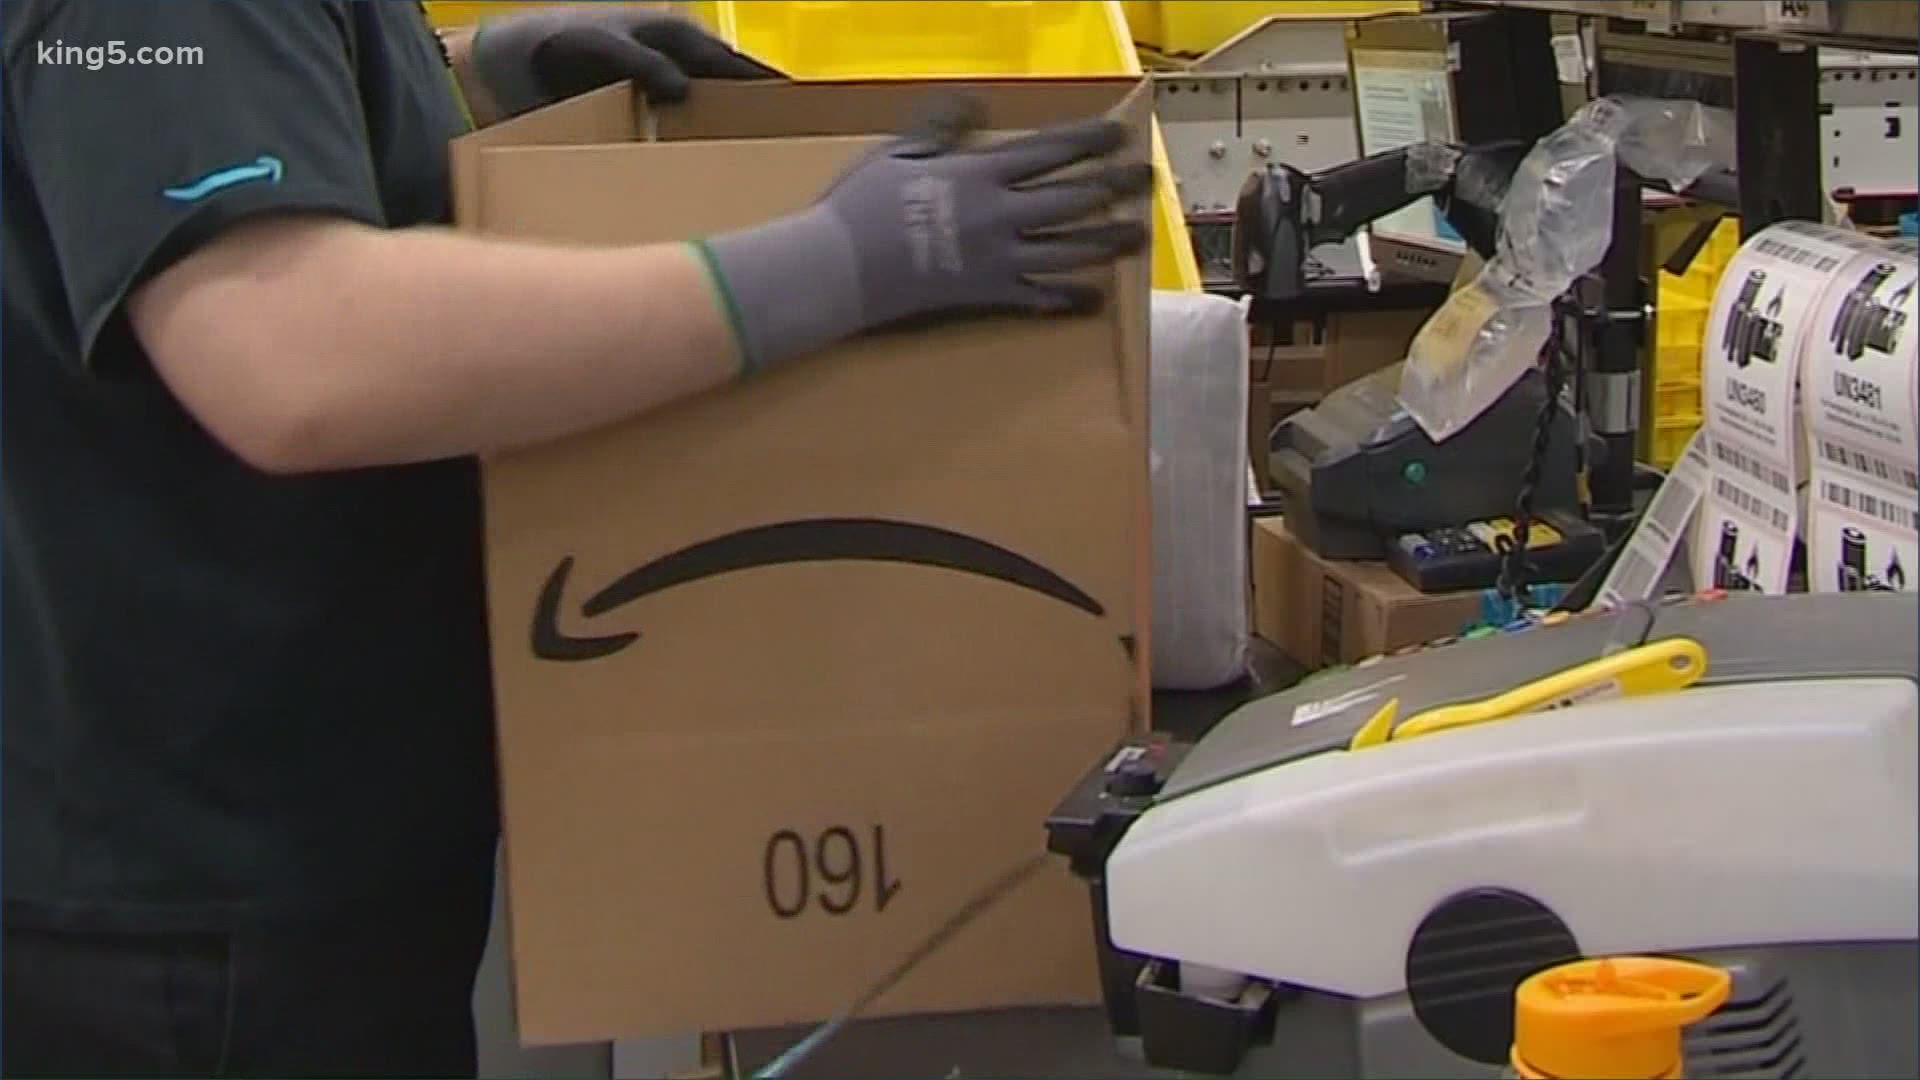 A labor agency announced it will increase workers' compensation rates for Amazon's fulfillment centers.